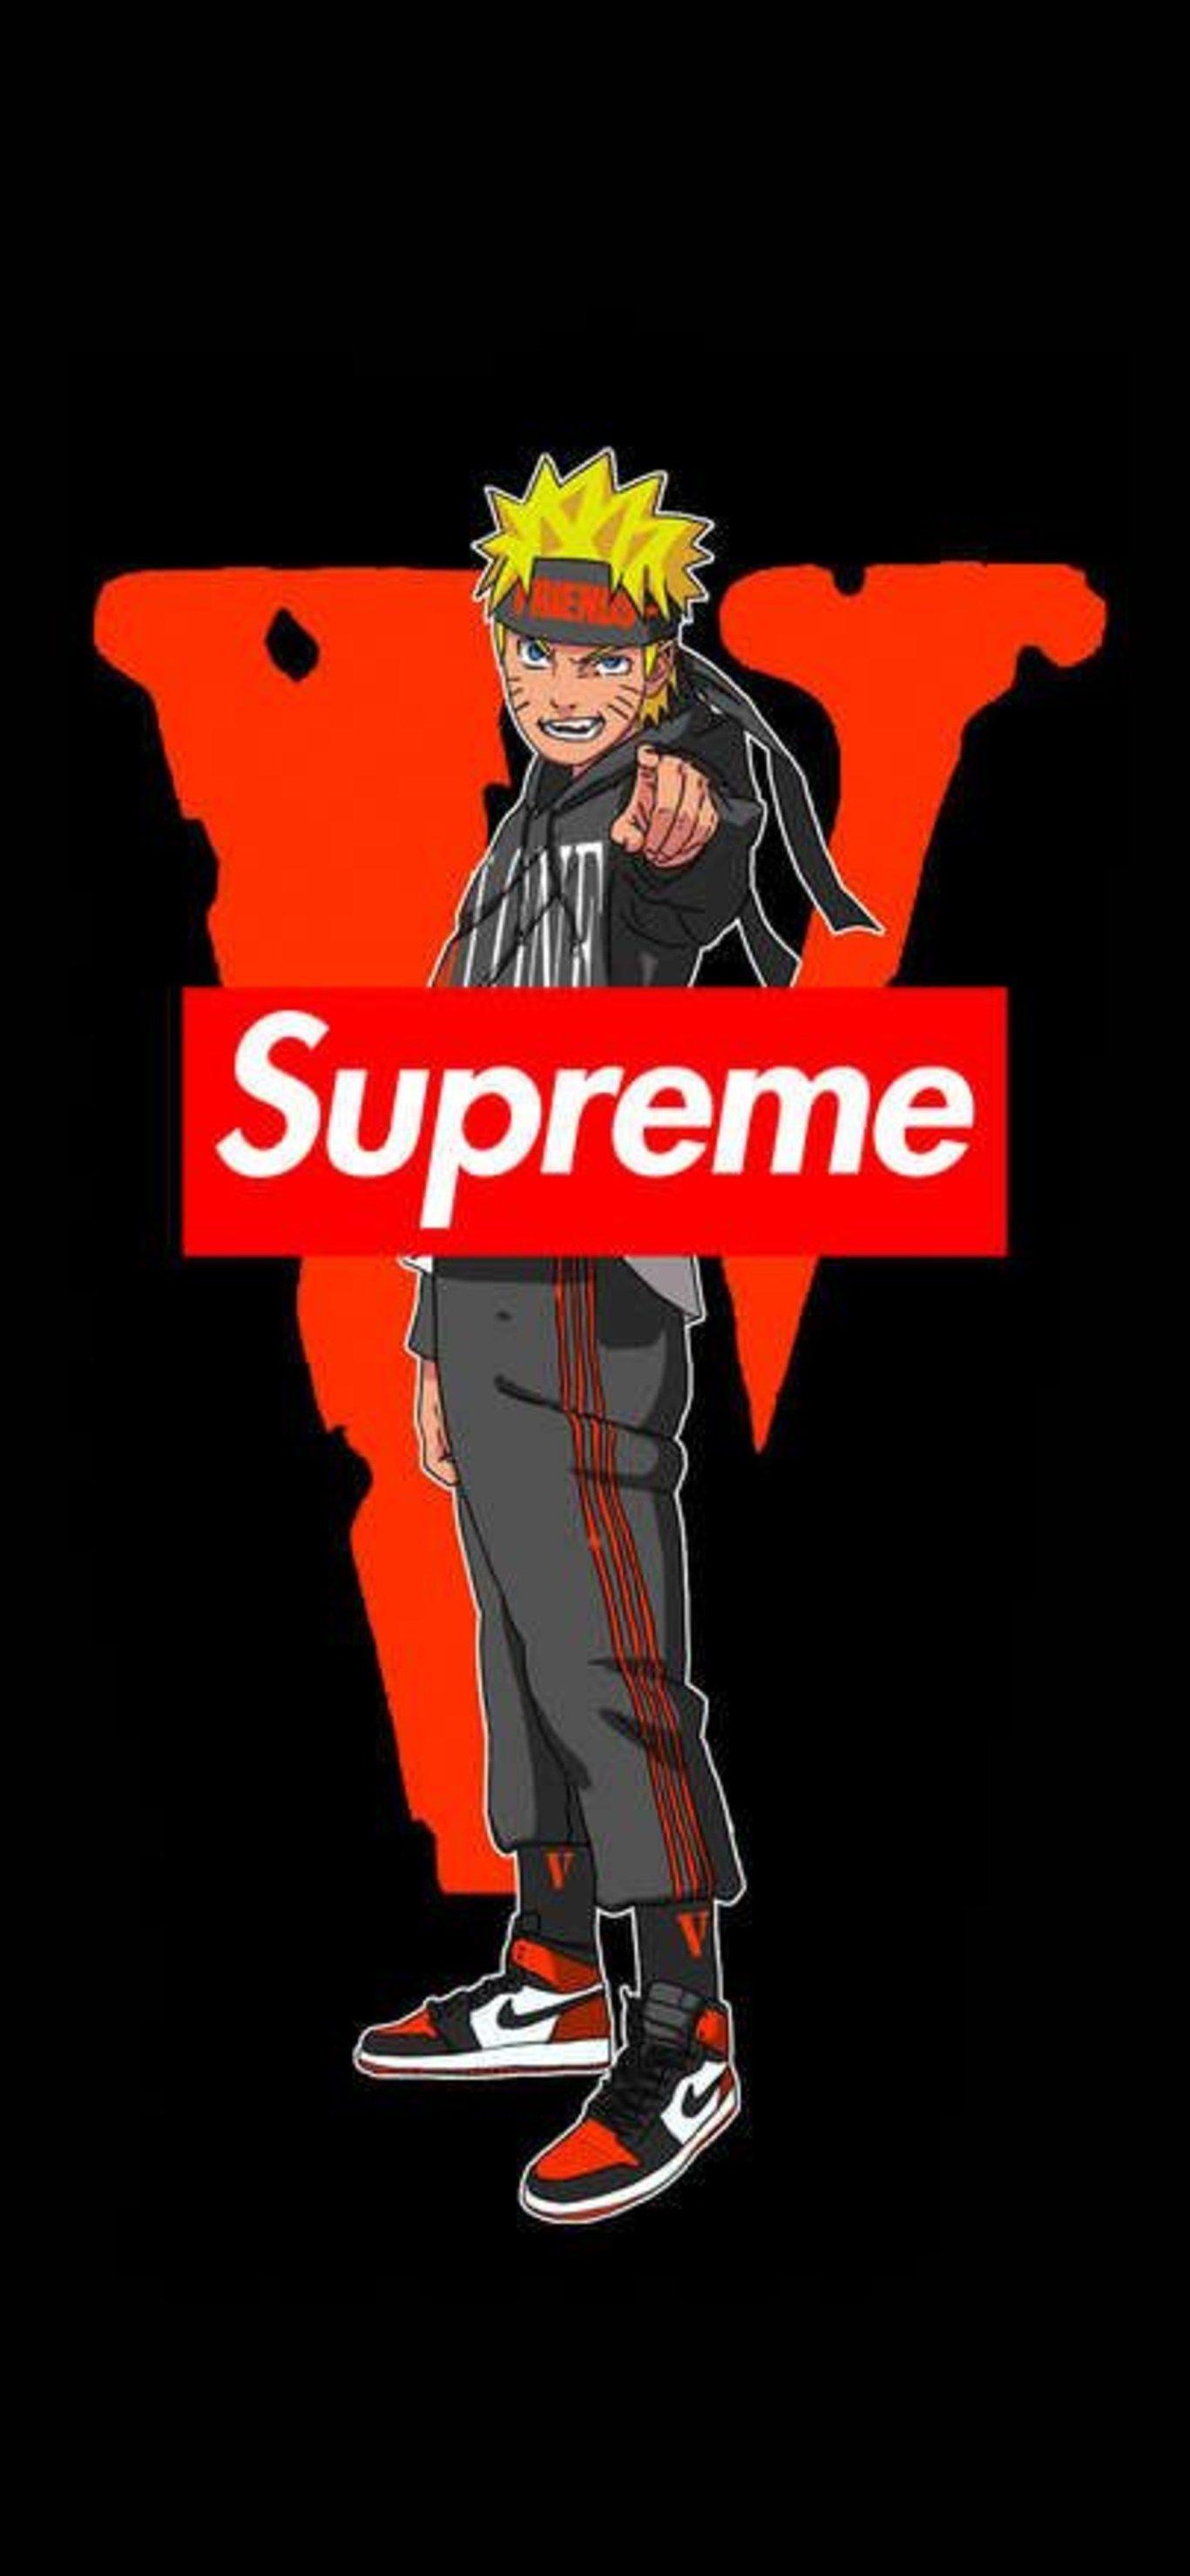 Cool Naruto Supreme Wallpapers Top Free Cool Naruto Supreme Backgrounds Wallpaperaccess Top 10 shounen manga list best recommendations. cool naruto supreme wallpapers top